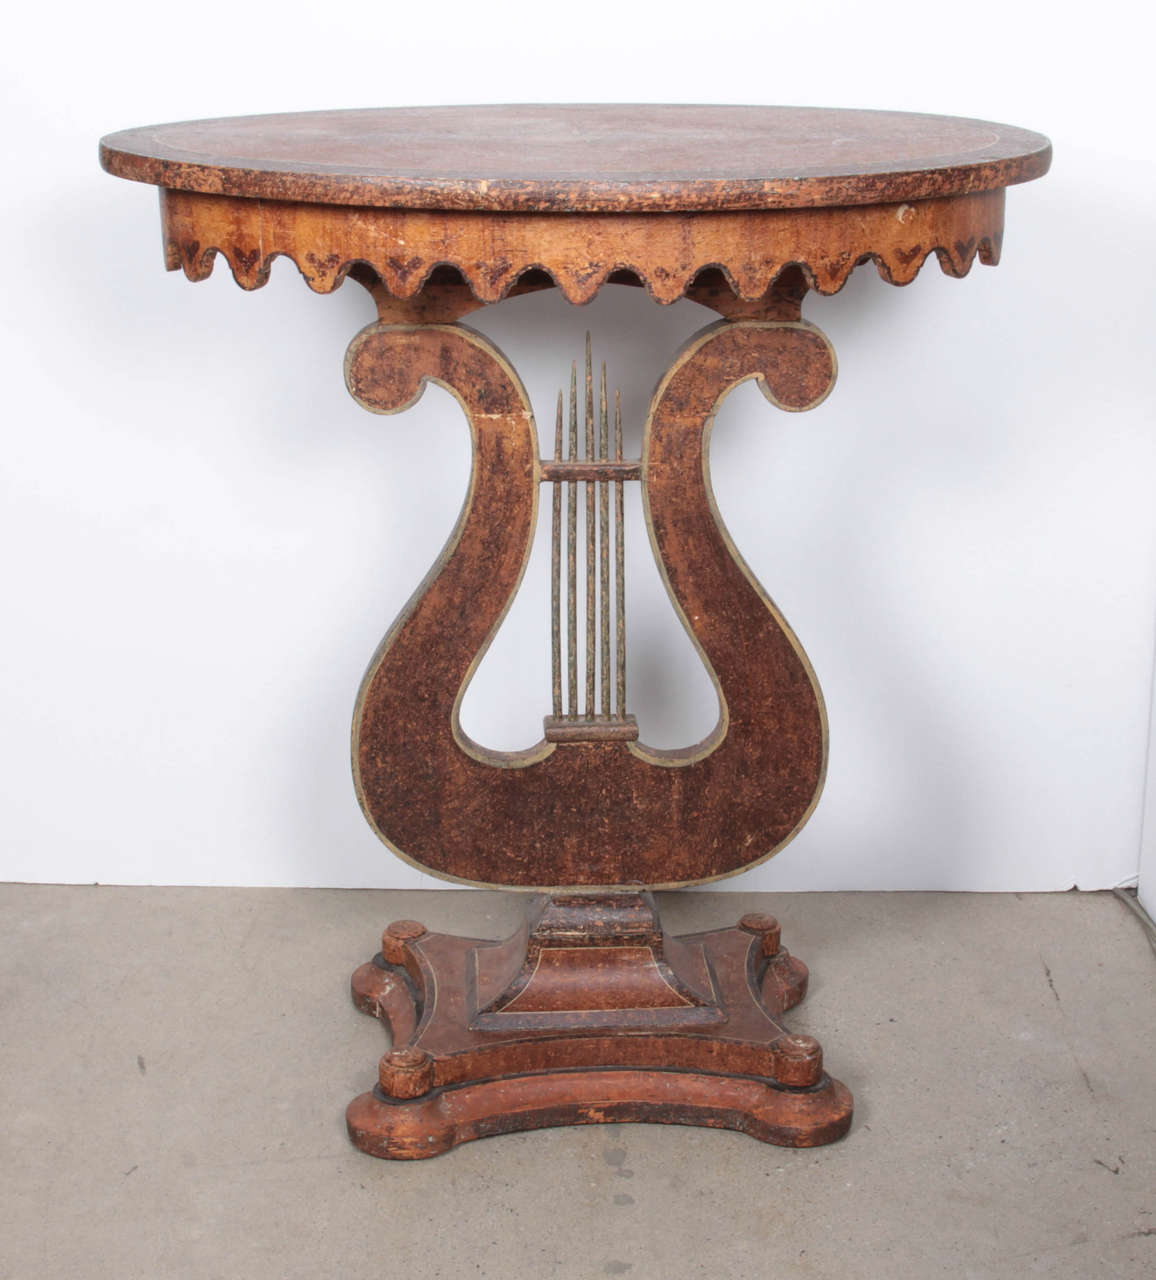 A Swedish painted side table, Circa 1860, with an oval top above a scalloped apron raised on a lyre form support and ending with a concave sided base. Dry scraped to the original paint surface.